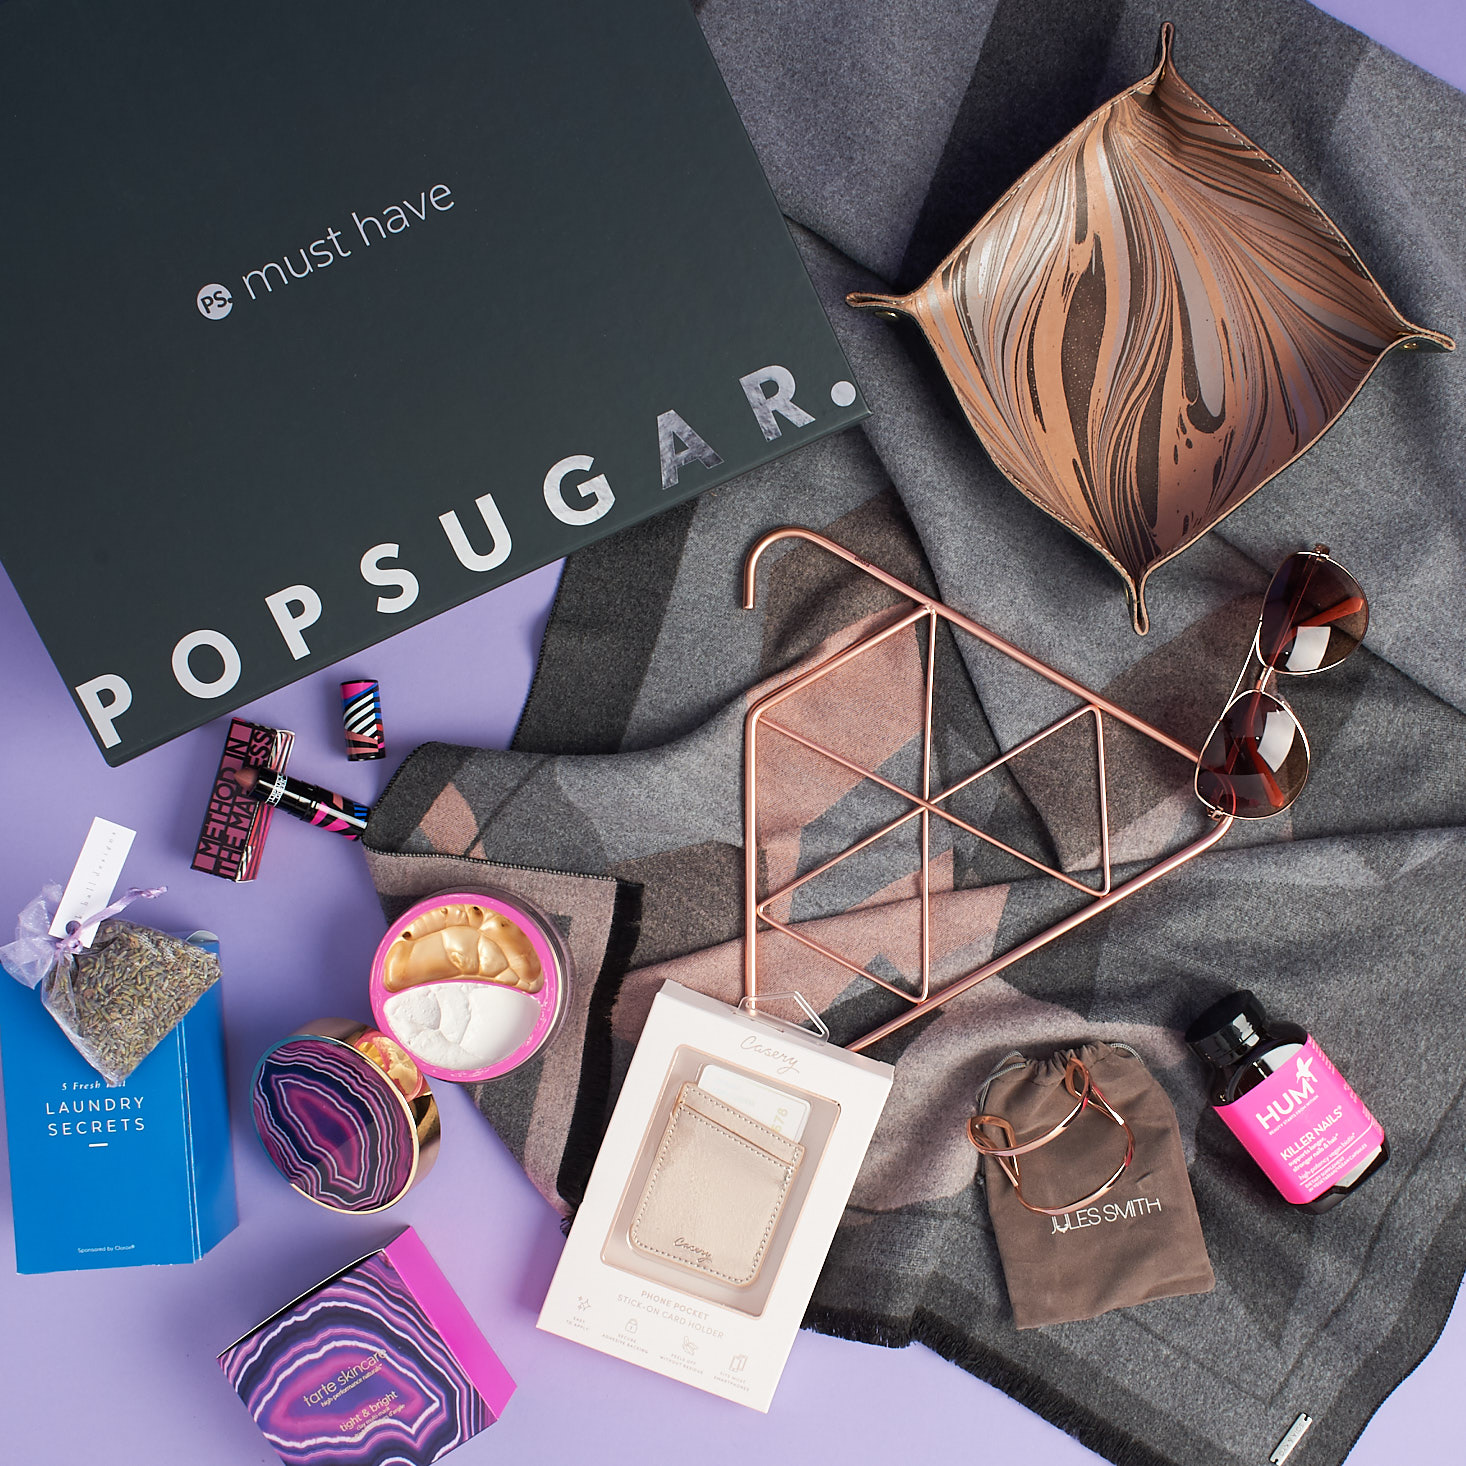 Last Day! Get the Fall POPSUGAR Box for $25 with Subscription!